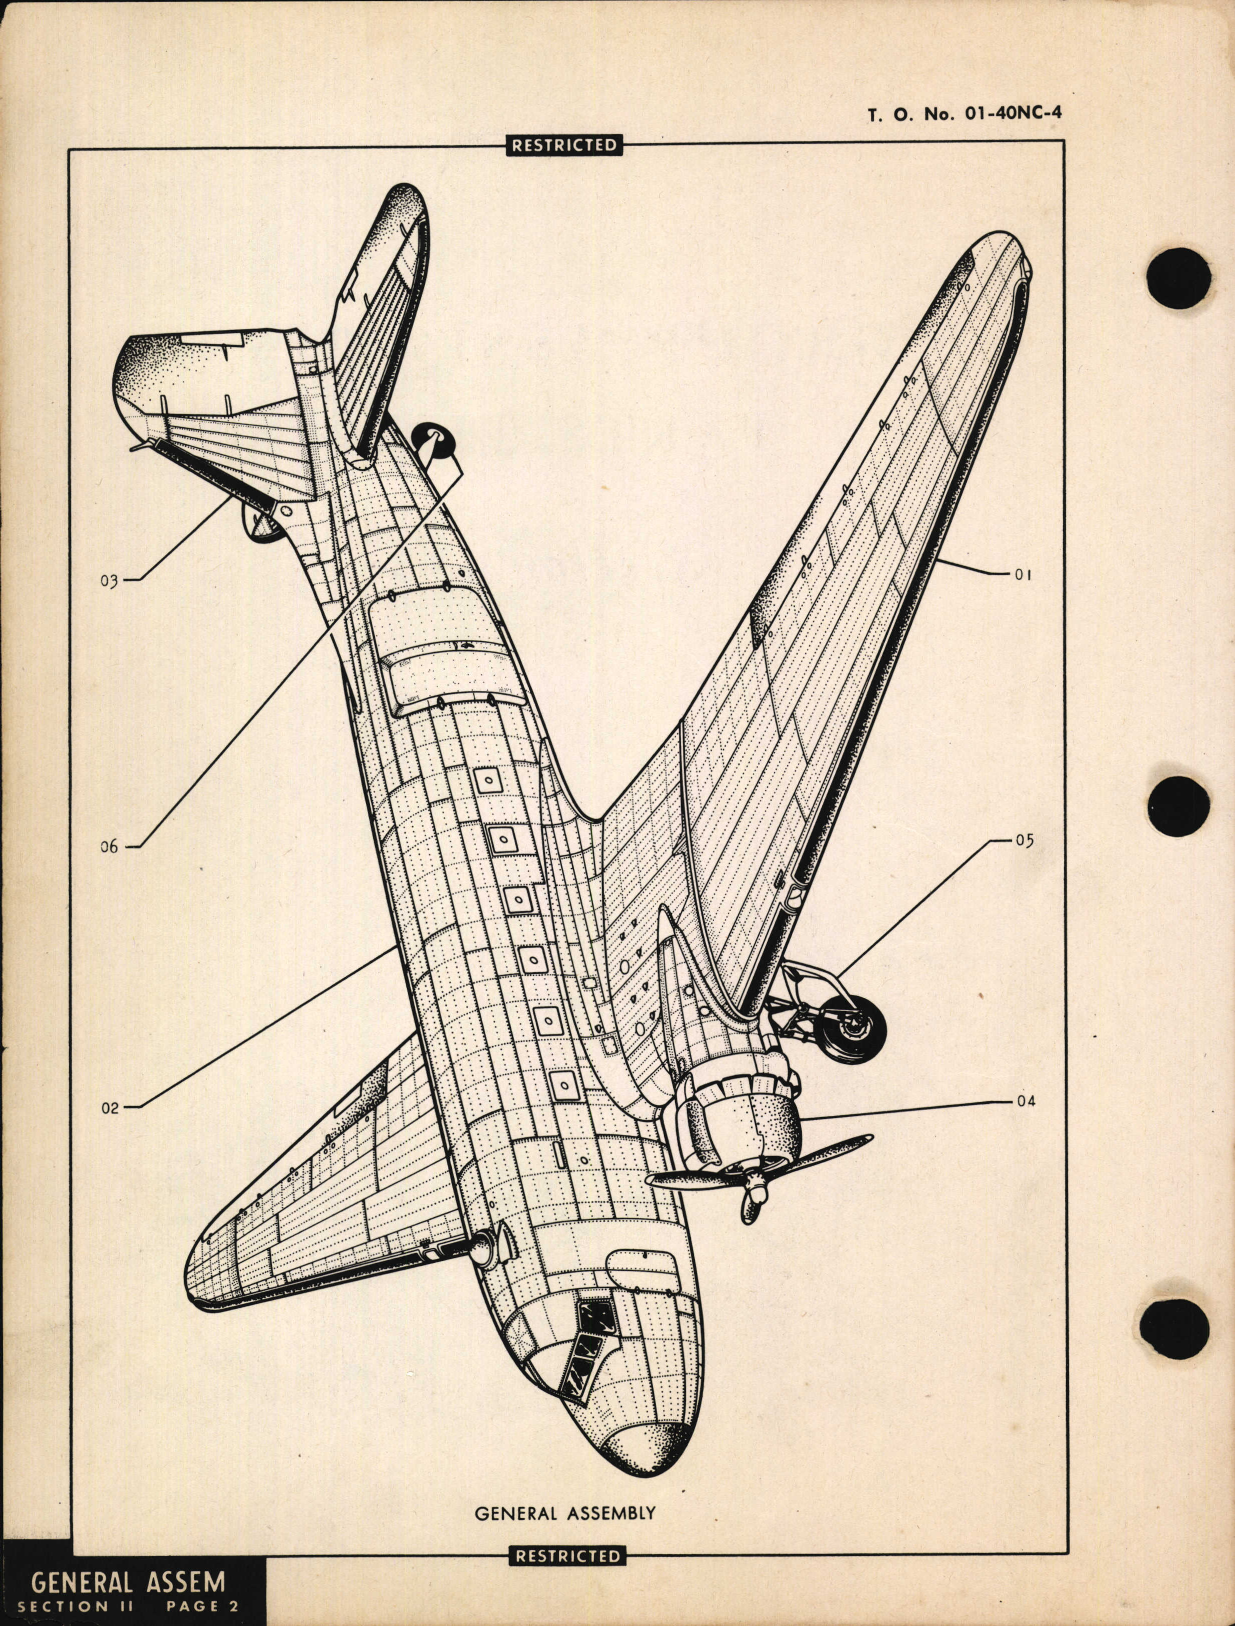 Sample page 6 from AirCorps Library document: Parts Catalog for C-47 and R4D-1